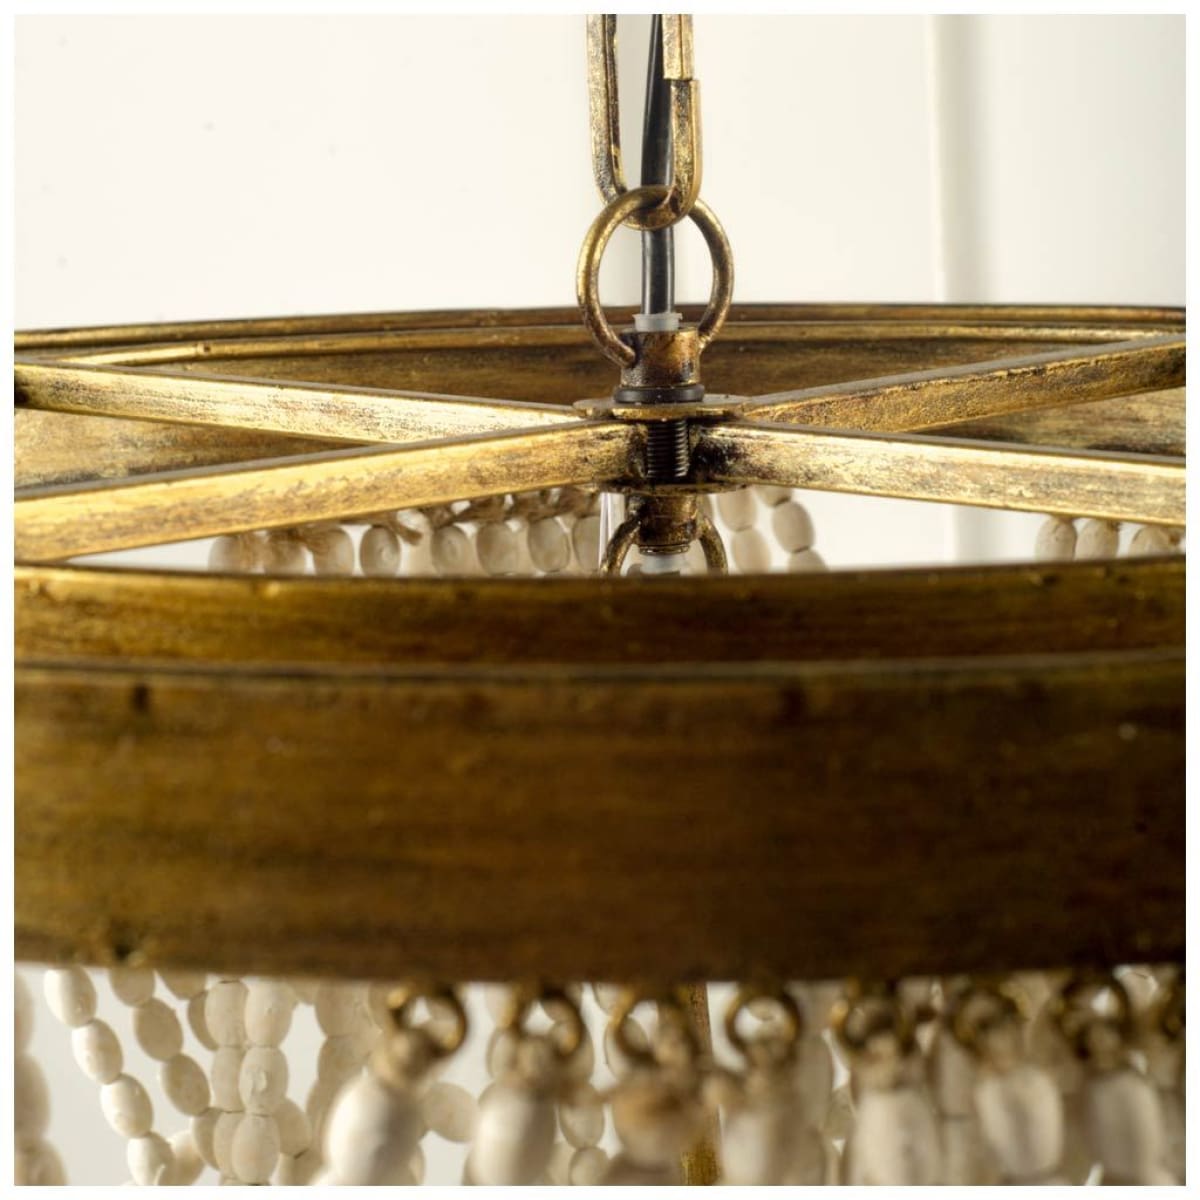 Pendra Chandelier Gold Metal | Whitewashed Wood - chandeliers